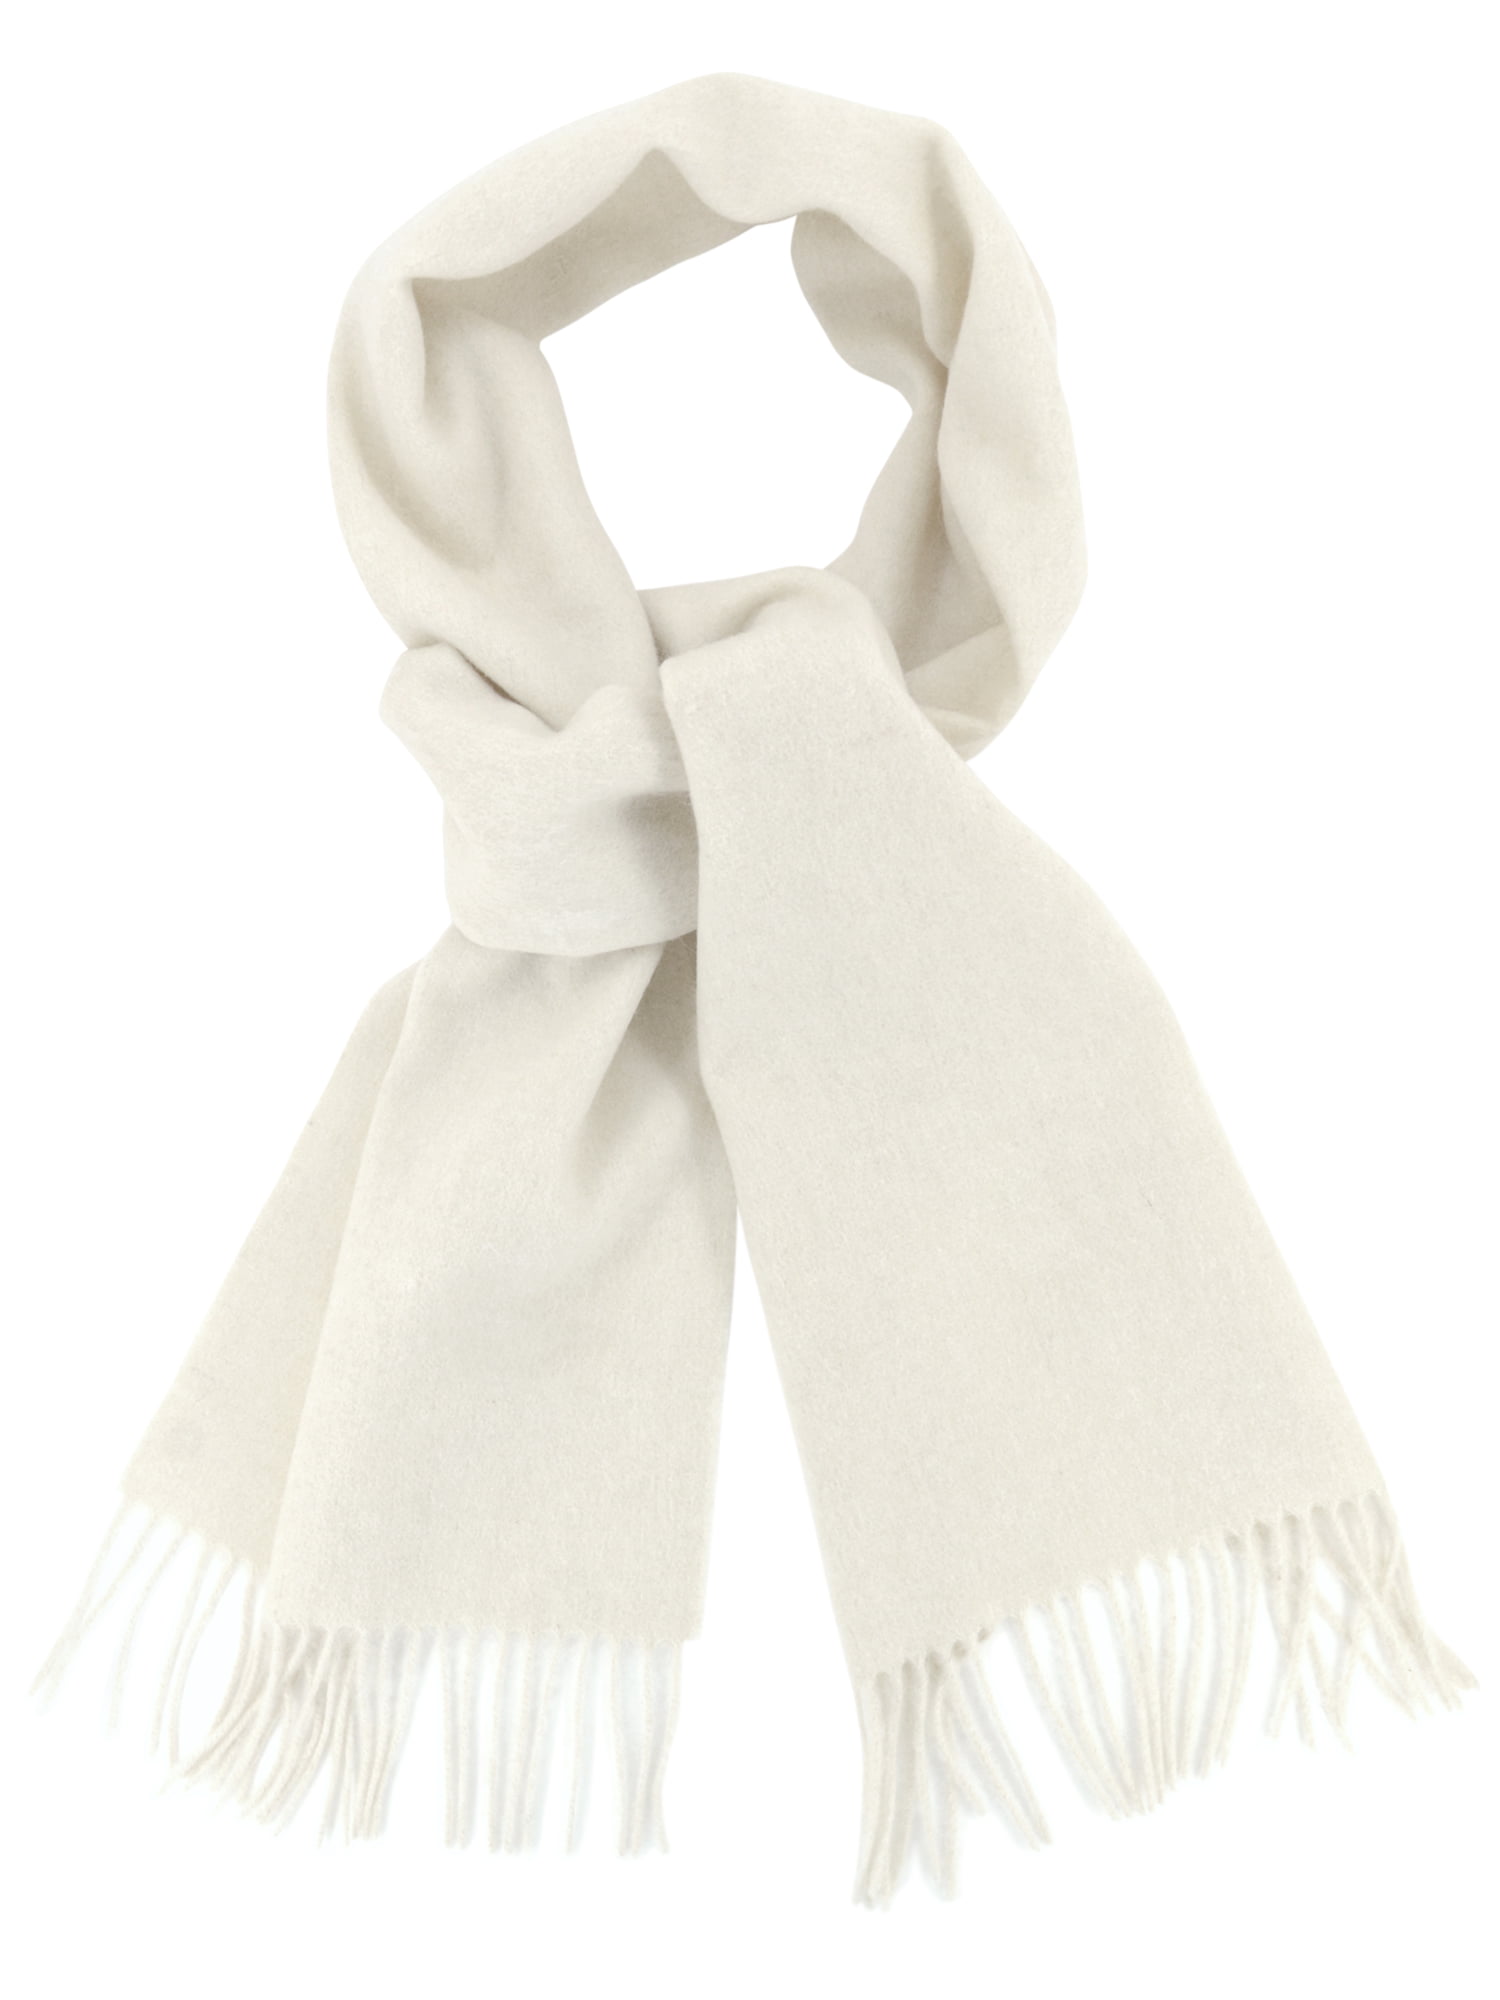 Biagio 100% Wool NECK Scarf Solid Cream Color Scarve for Men or Women ...